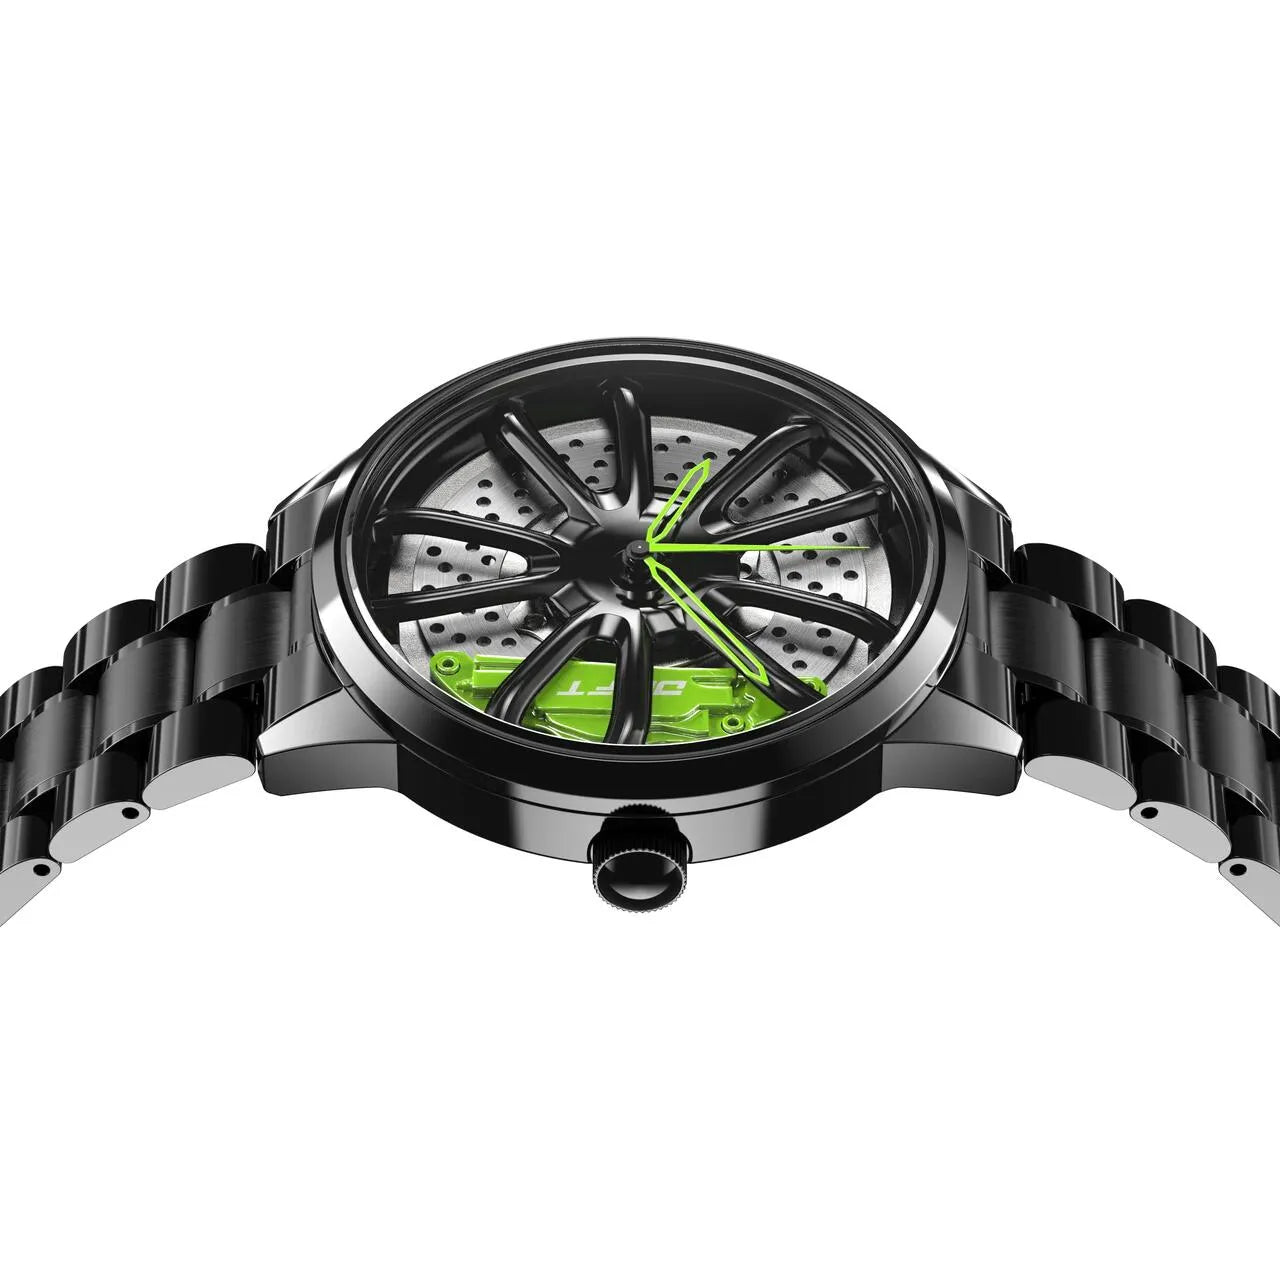 Rev up your auto style with our captivating green Performance GT Rim Watch! Crafted by a German startup, these precision watches are engineered to set the hearts of motorsport, tuning, and auto enthusiasts on fire. Get ready to spark your passion! #id_46744365465930